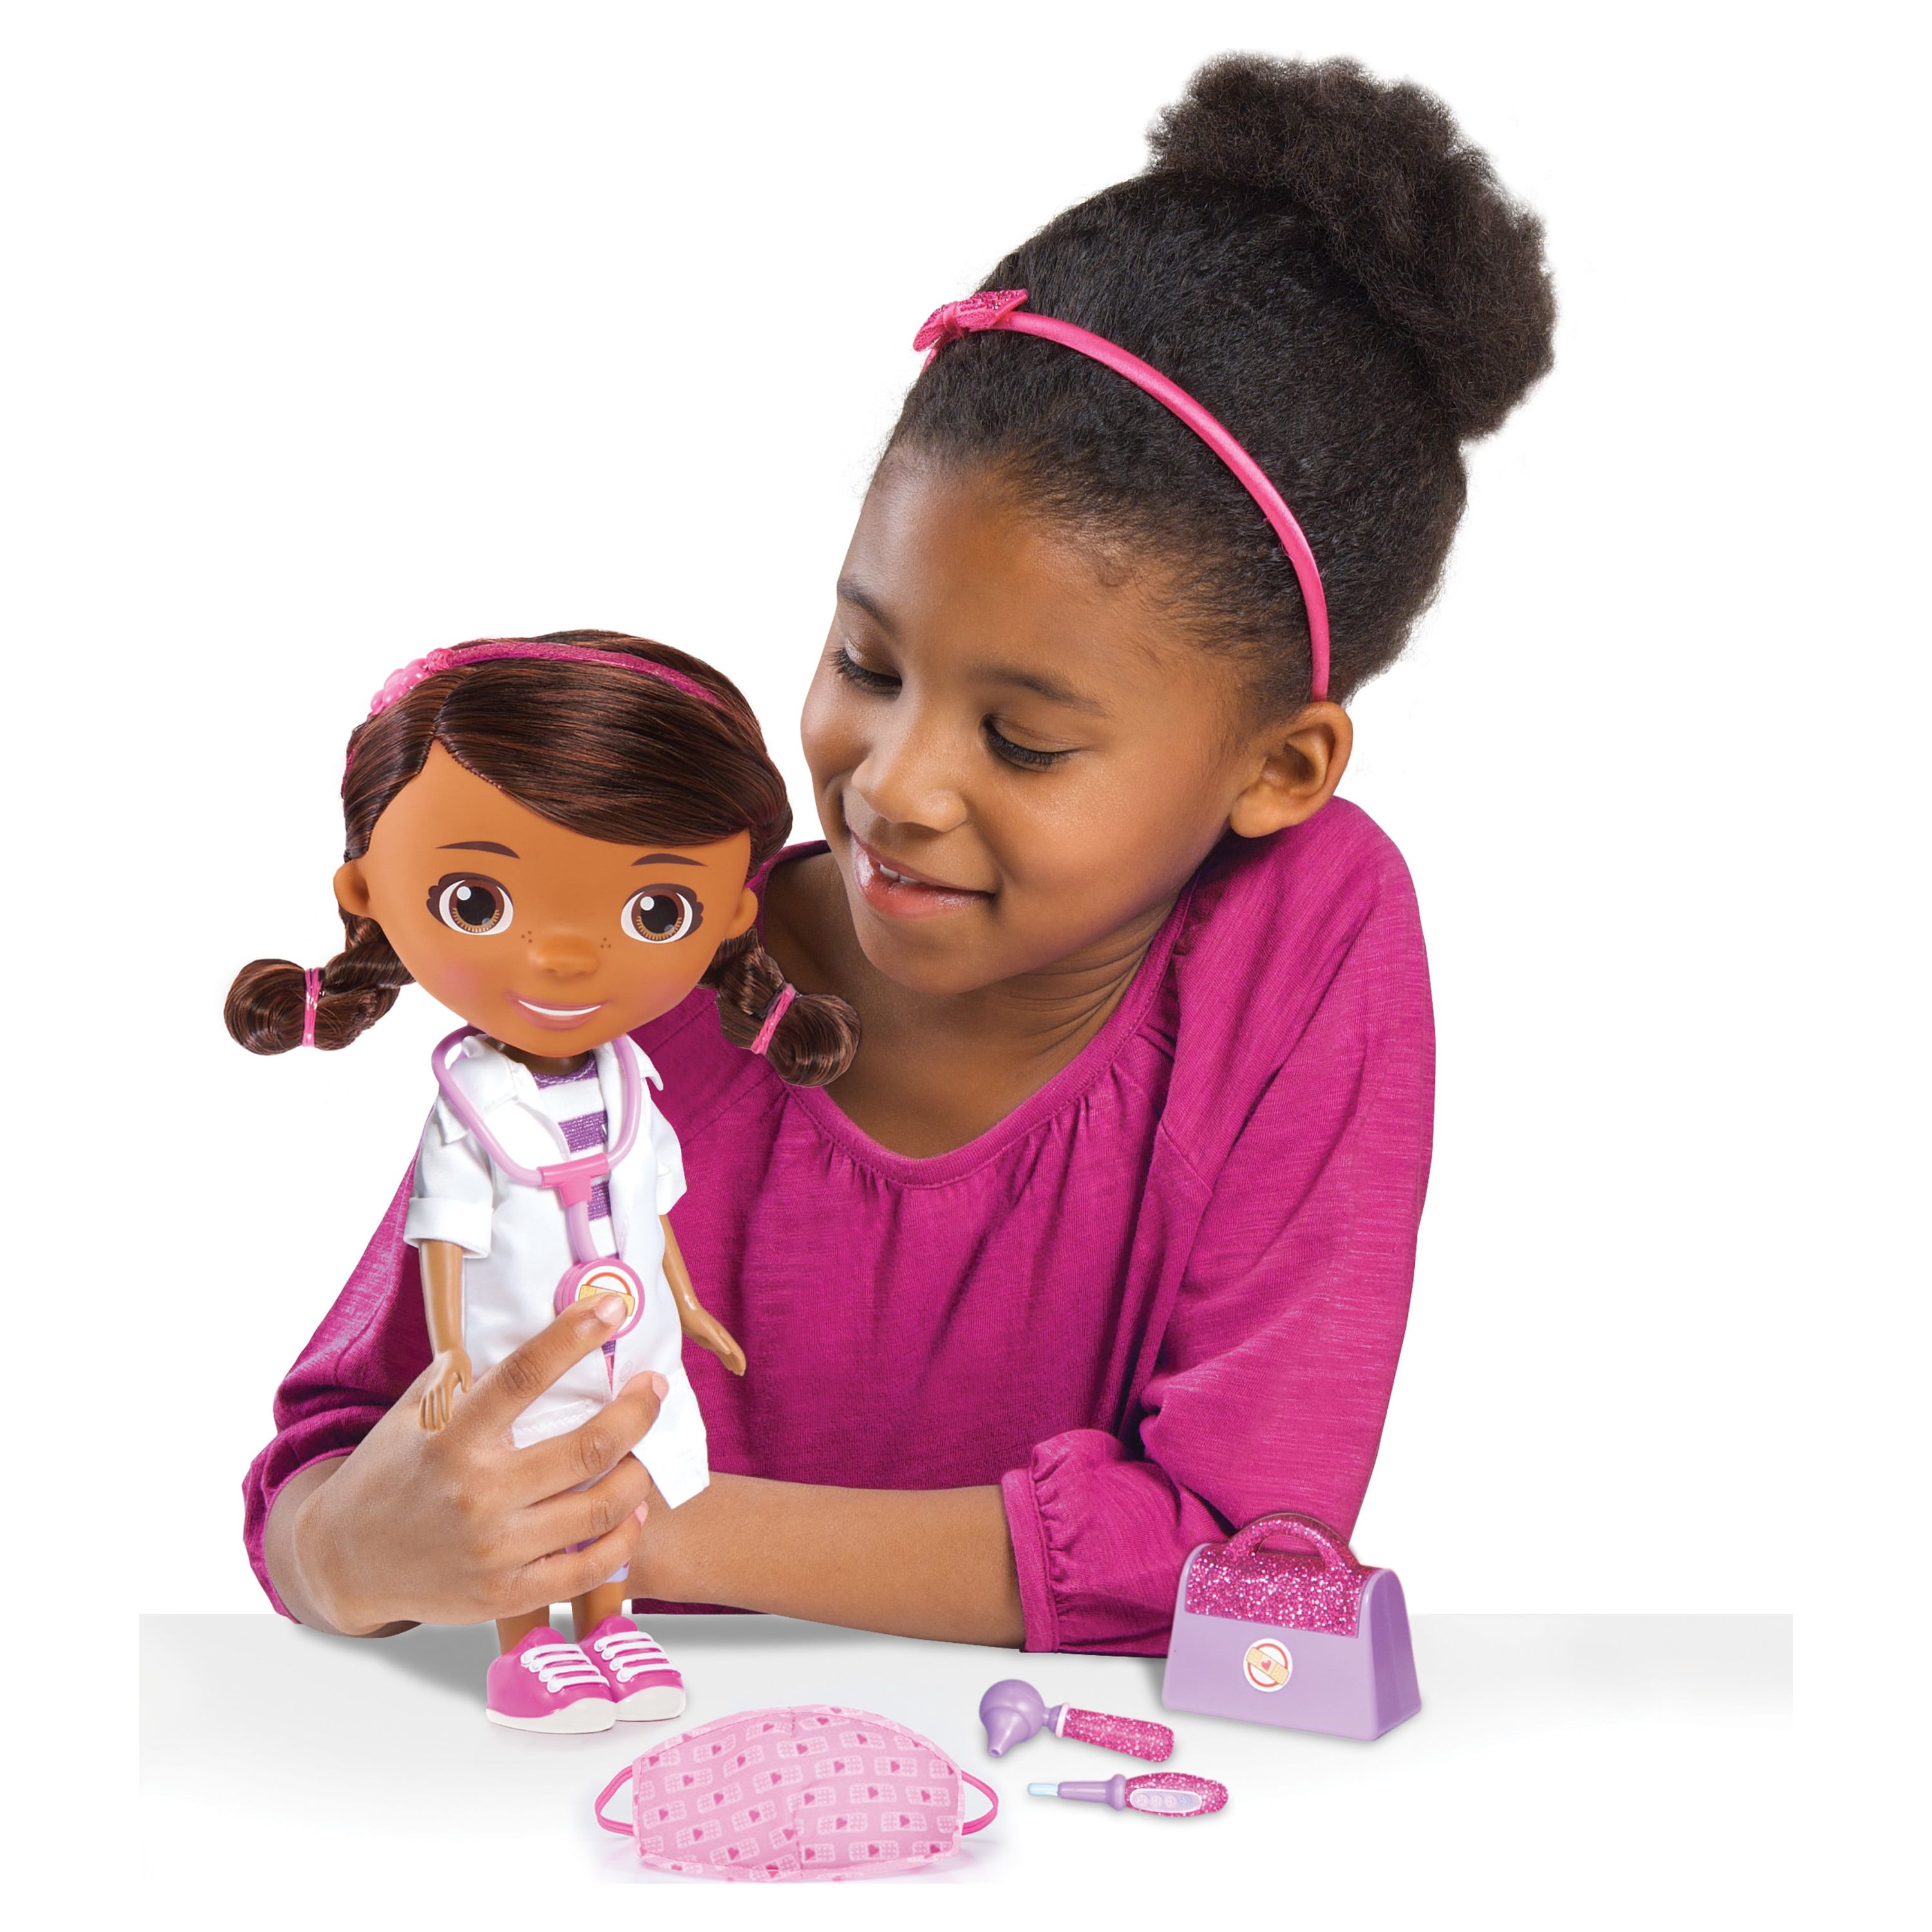 Disney Junior Doc McStuffins Wash Your Hands Singing Doll, With Mask & Accessories, Officially Licensed Kids Toys for Ages 3 Up, Gifts and Presents - image 3 of 5